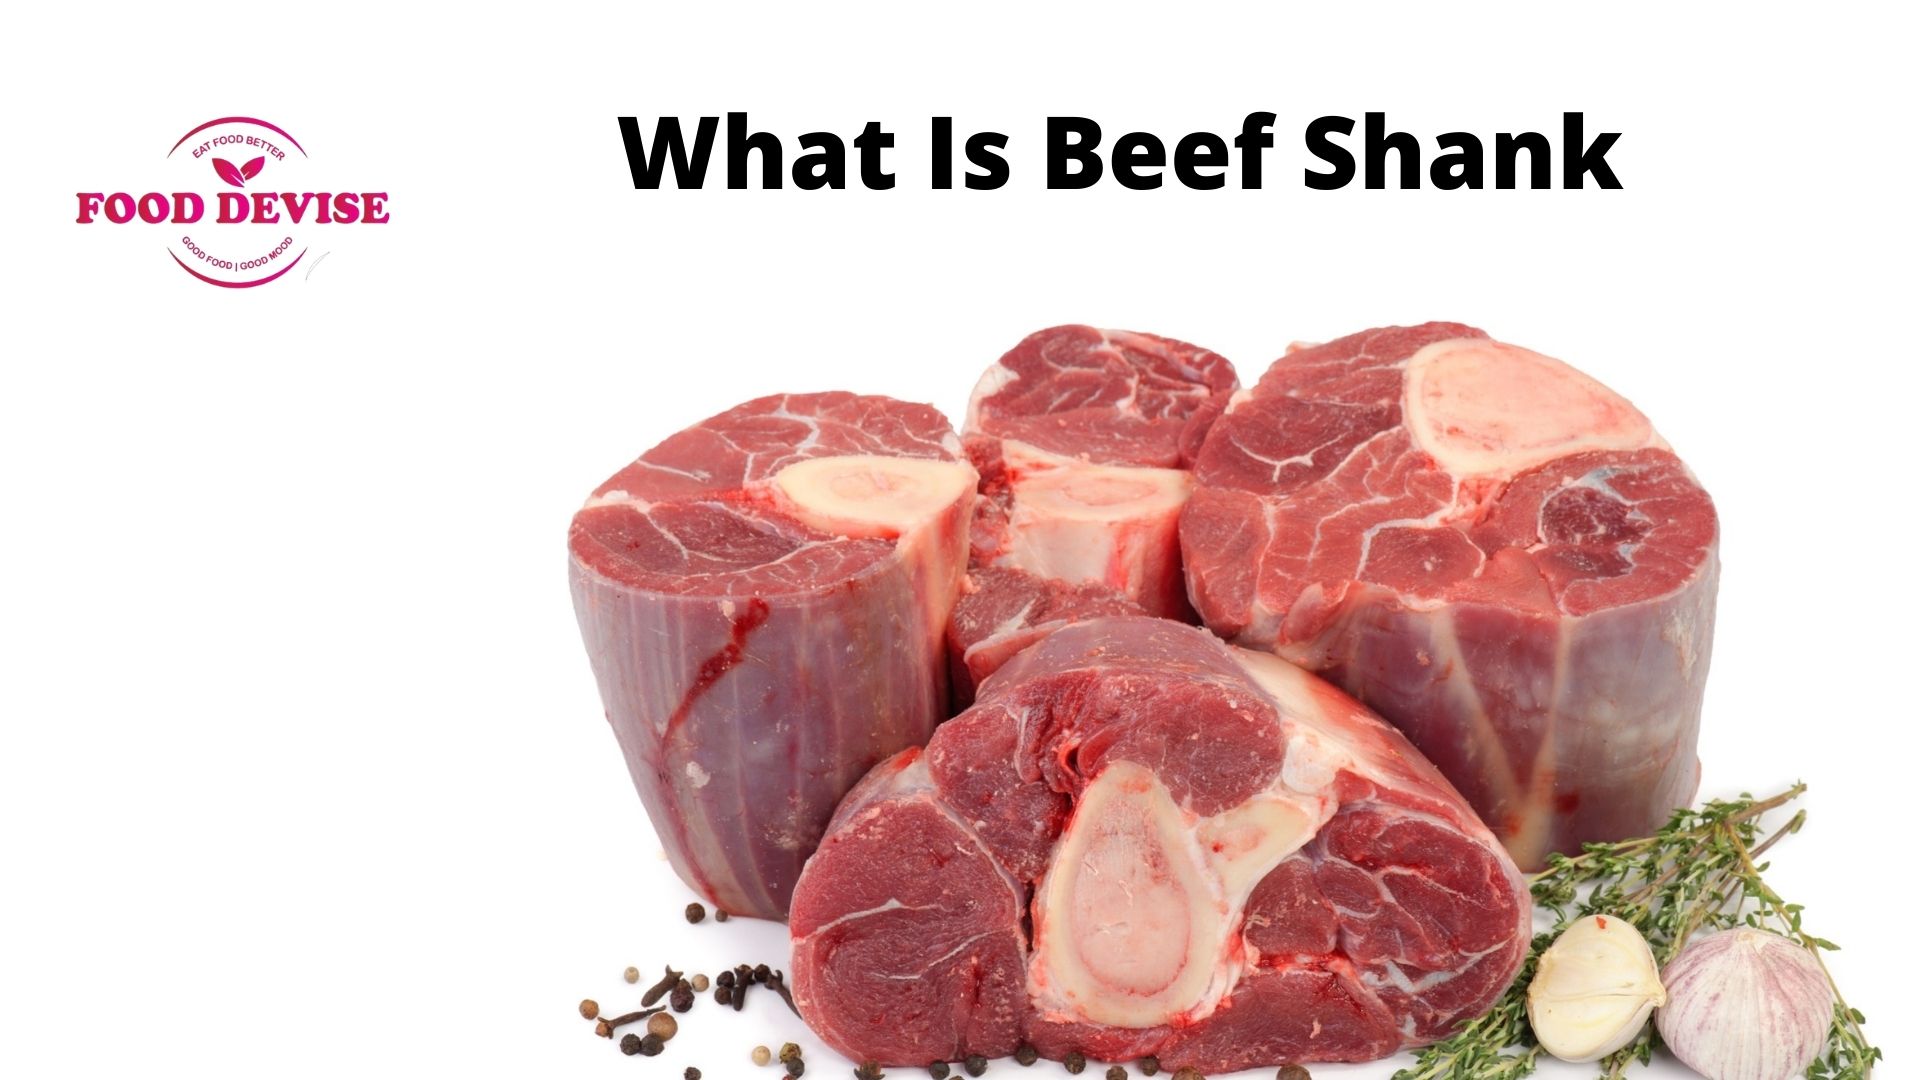 What Is Beef Shank